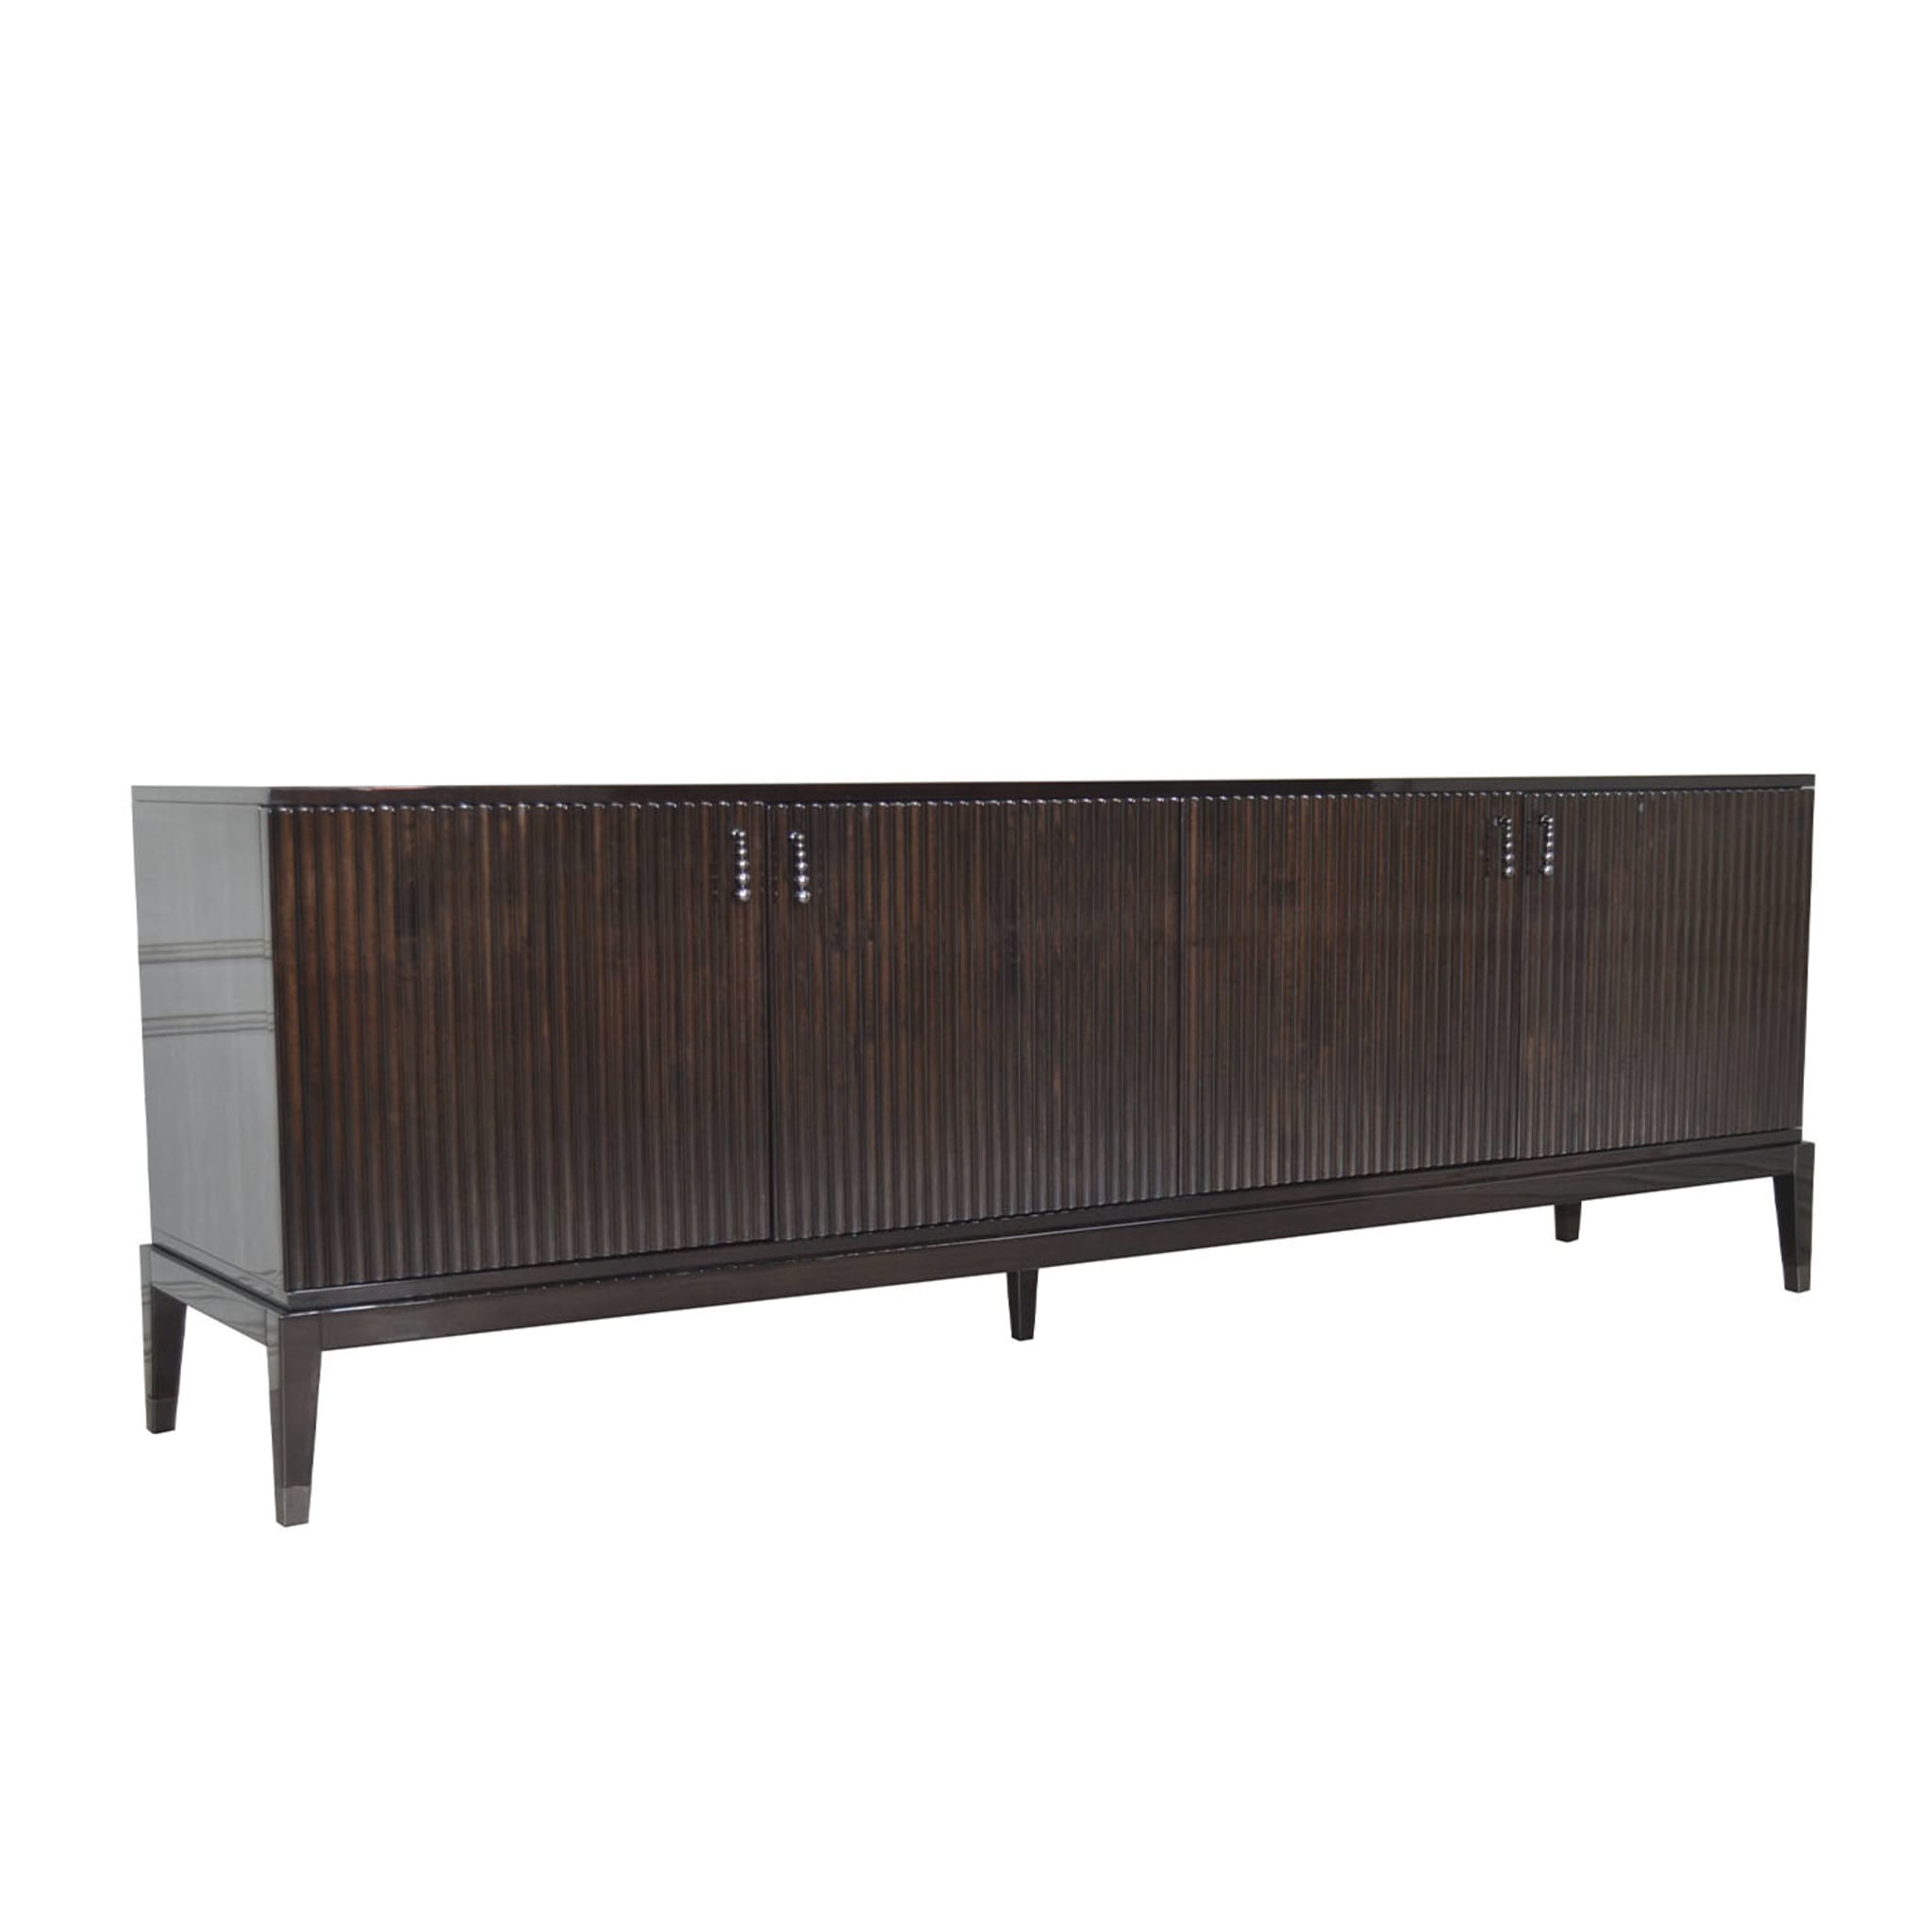 Italian Sideboard in Ebony Brown Color with Four Doors - Alternative view 1